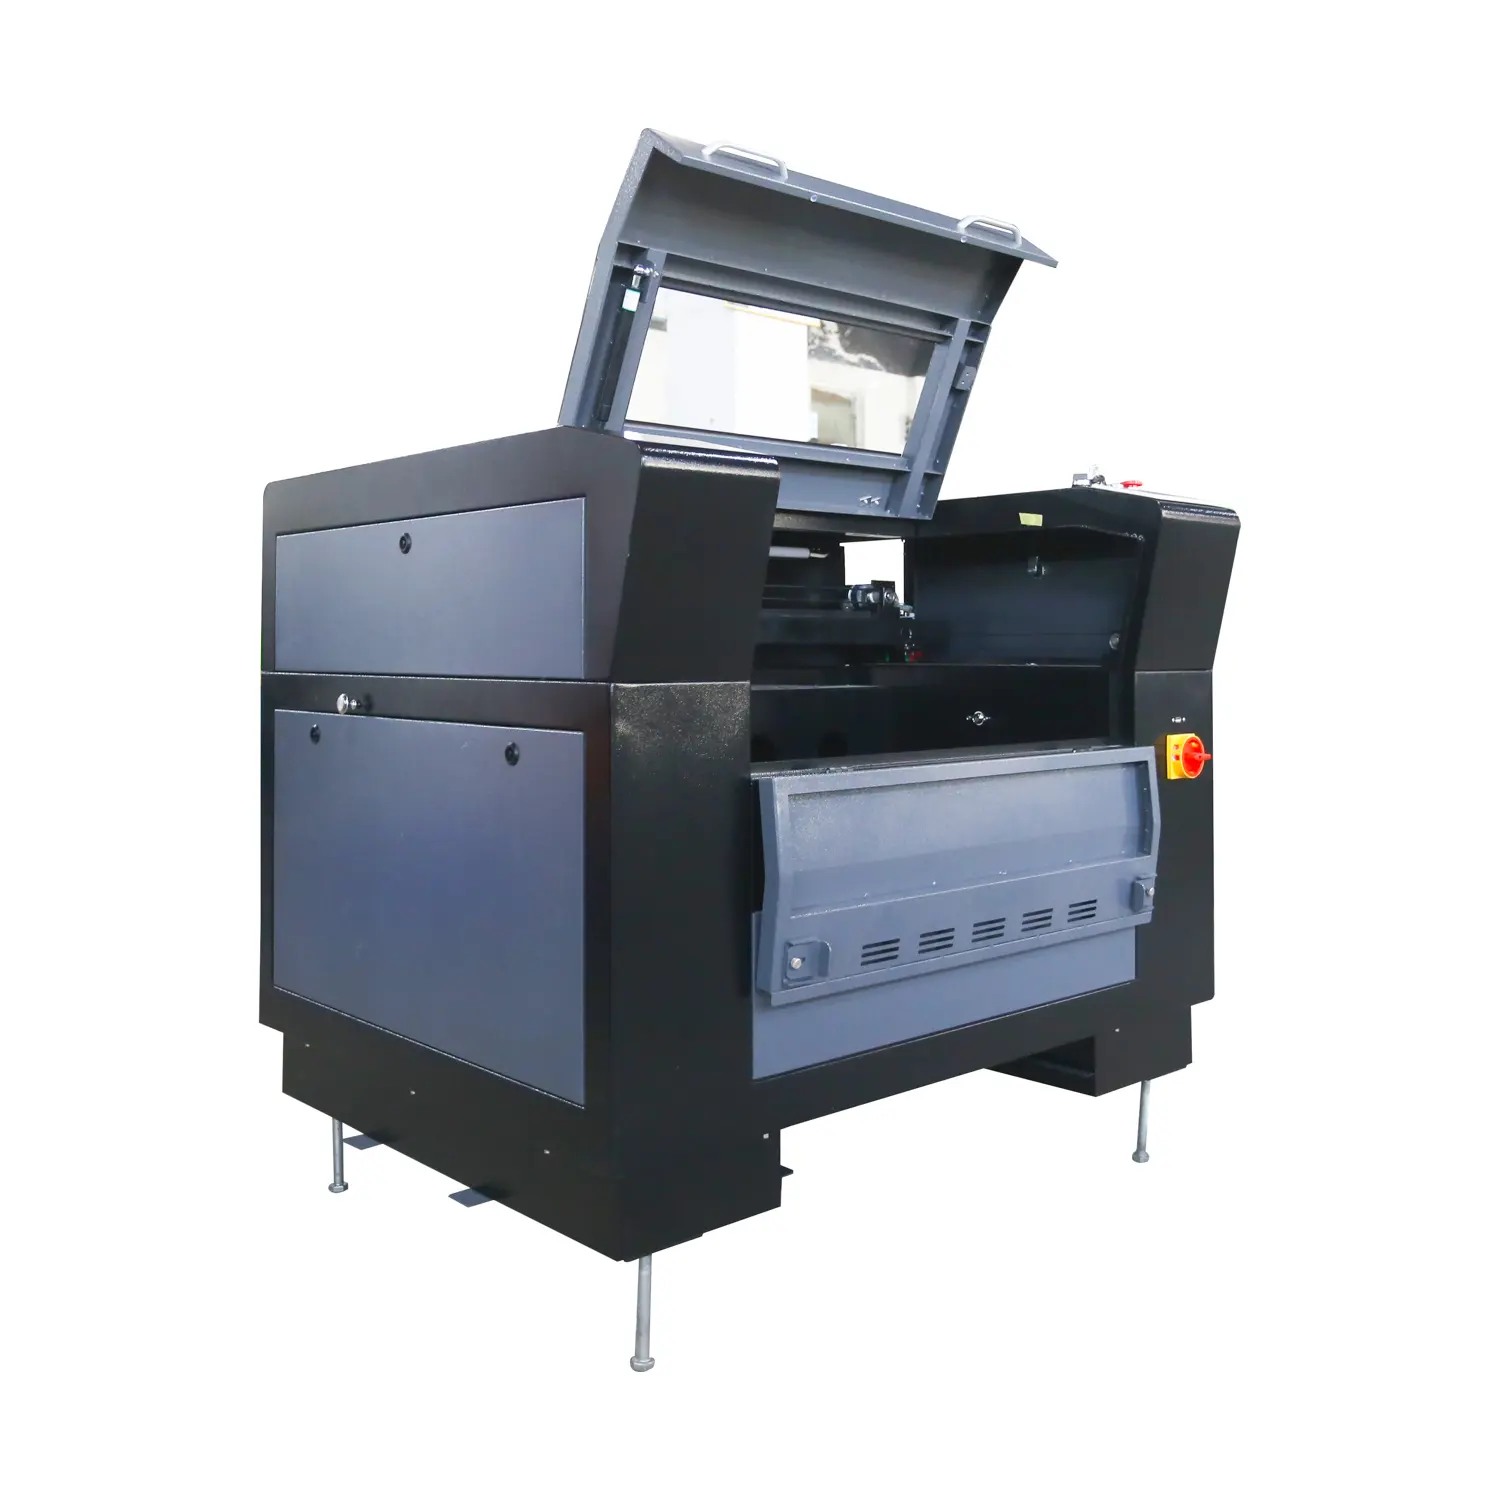 CO2 Laser machine 1390 for tombstone wood acrylic cutting and carving with 1300x900mm working area